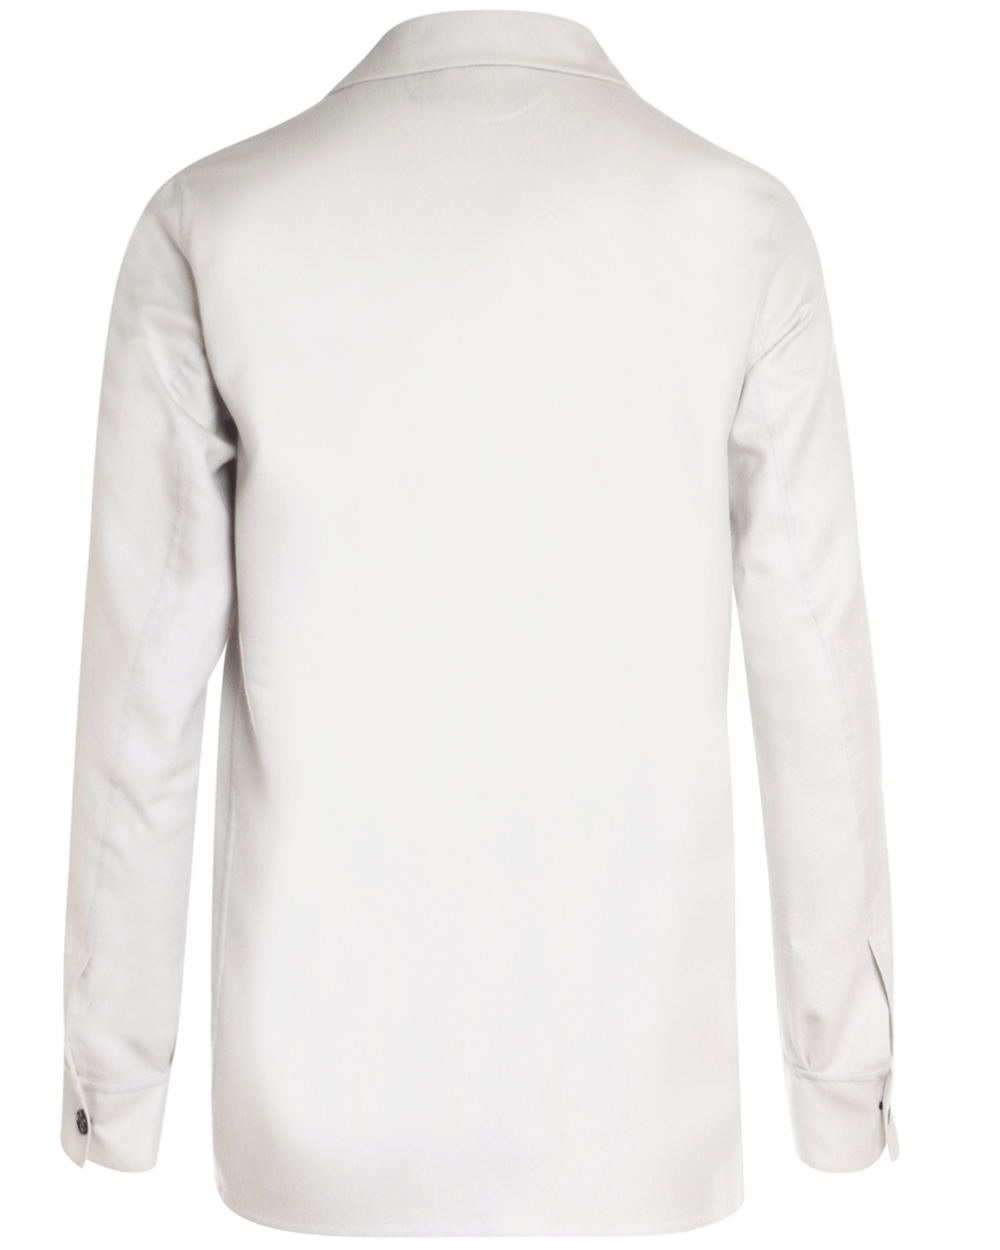 Ivory Double-Faced Cashmere Work Jacket